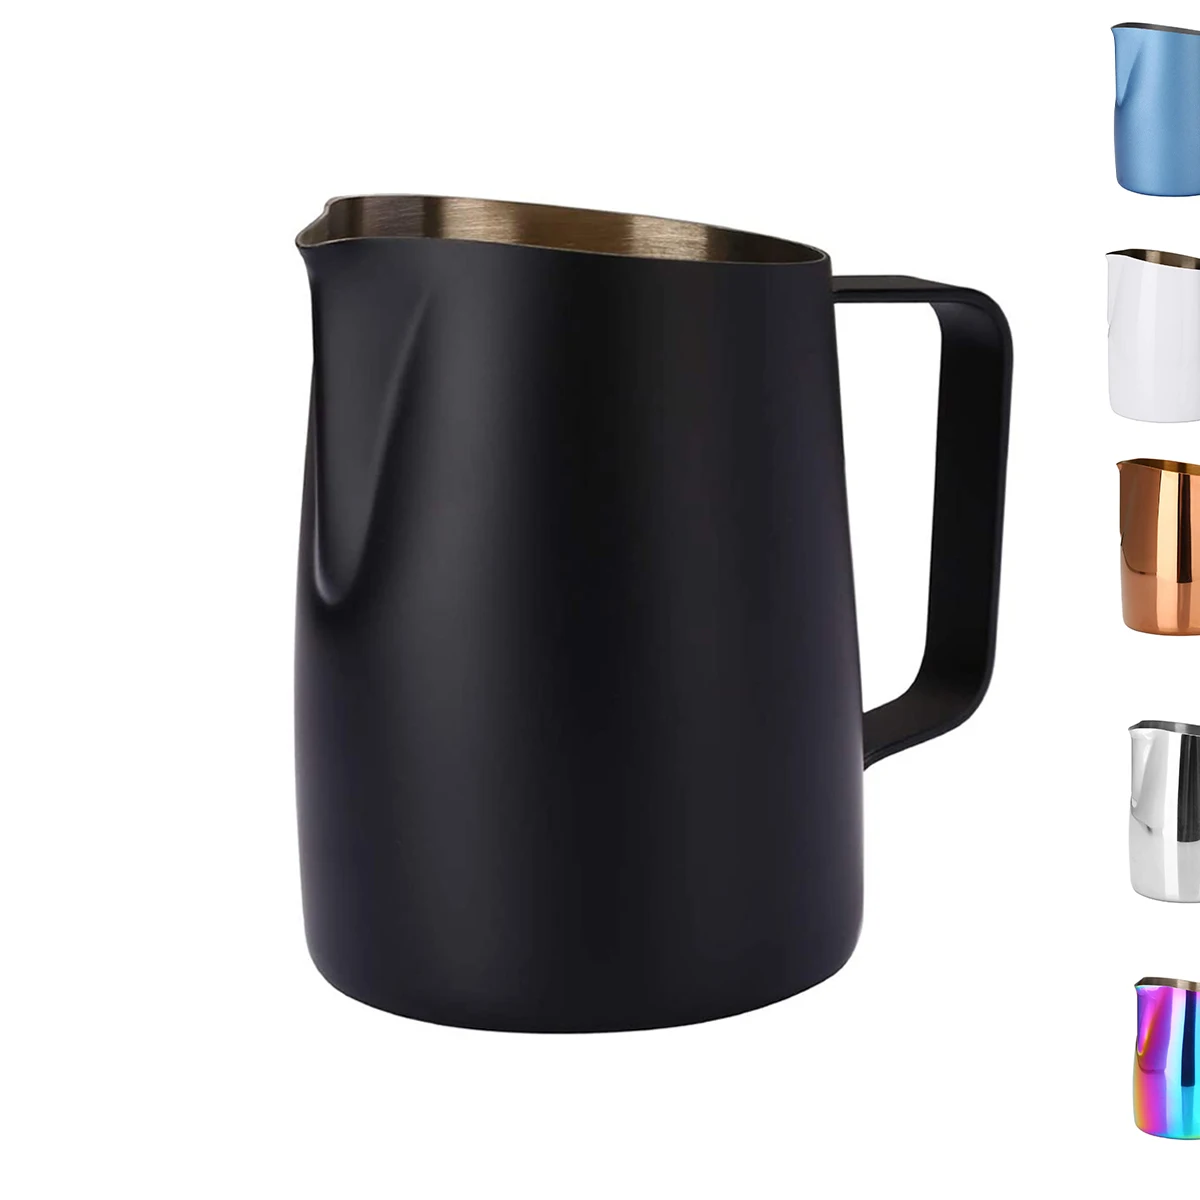 

600ml Latte Art Black Stainless Steel Streaming Coffee Barista Frother Milk Pitcher Jug